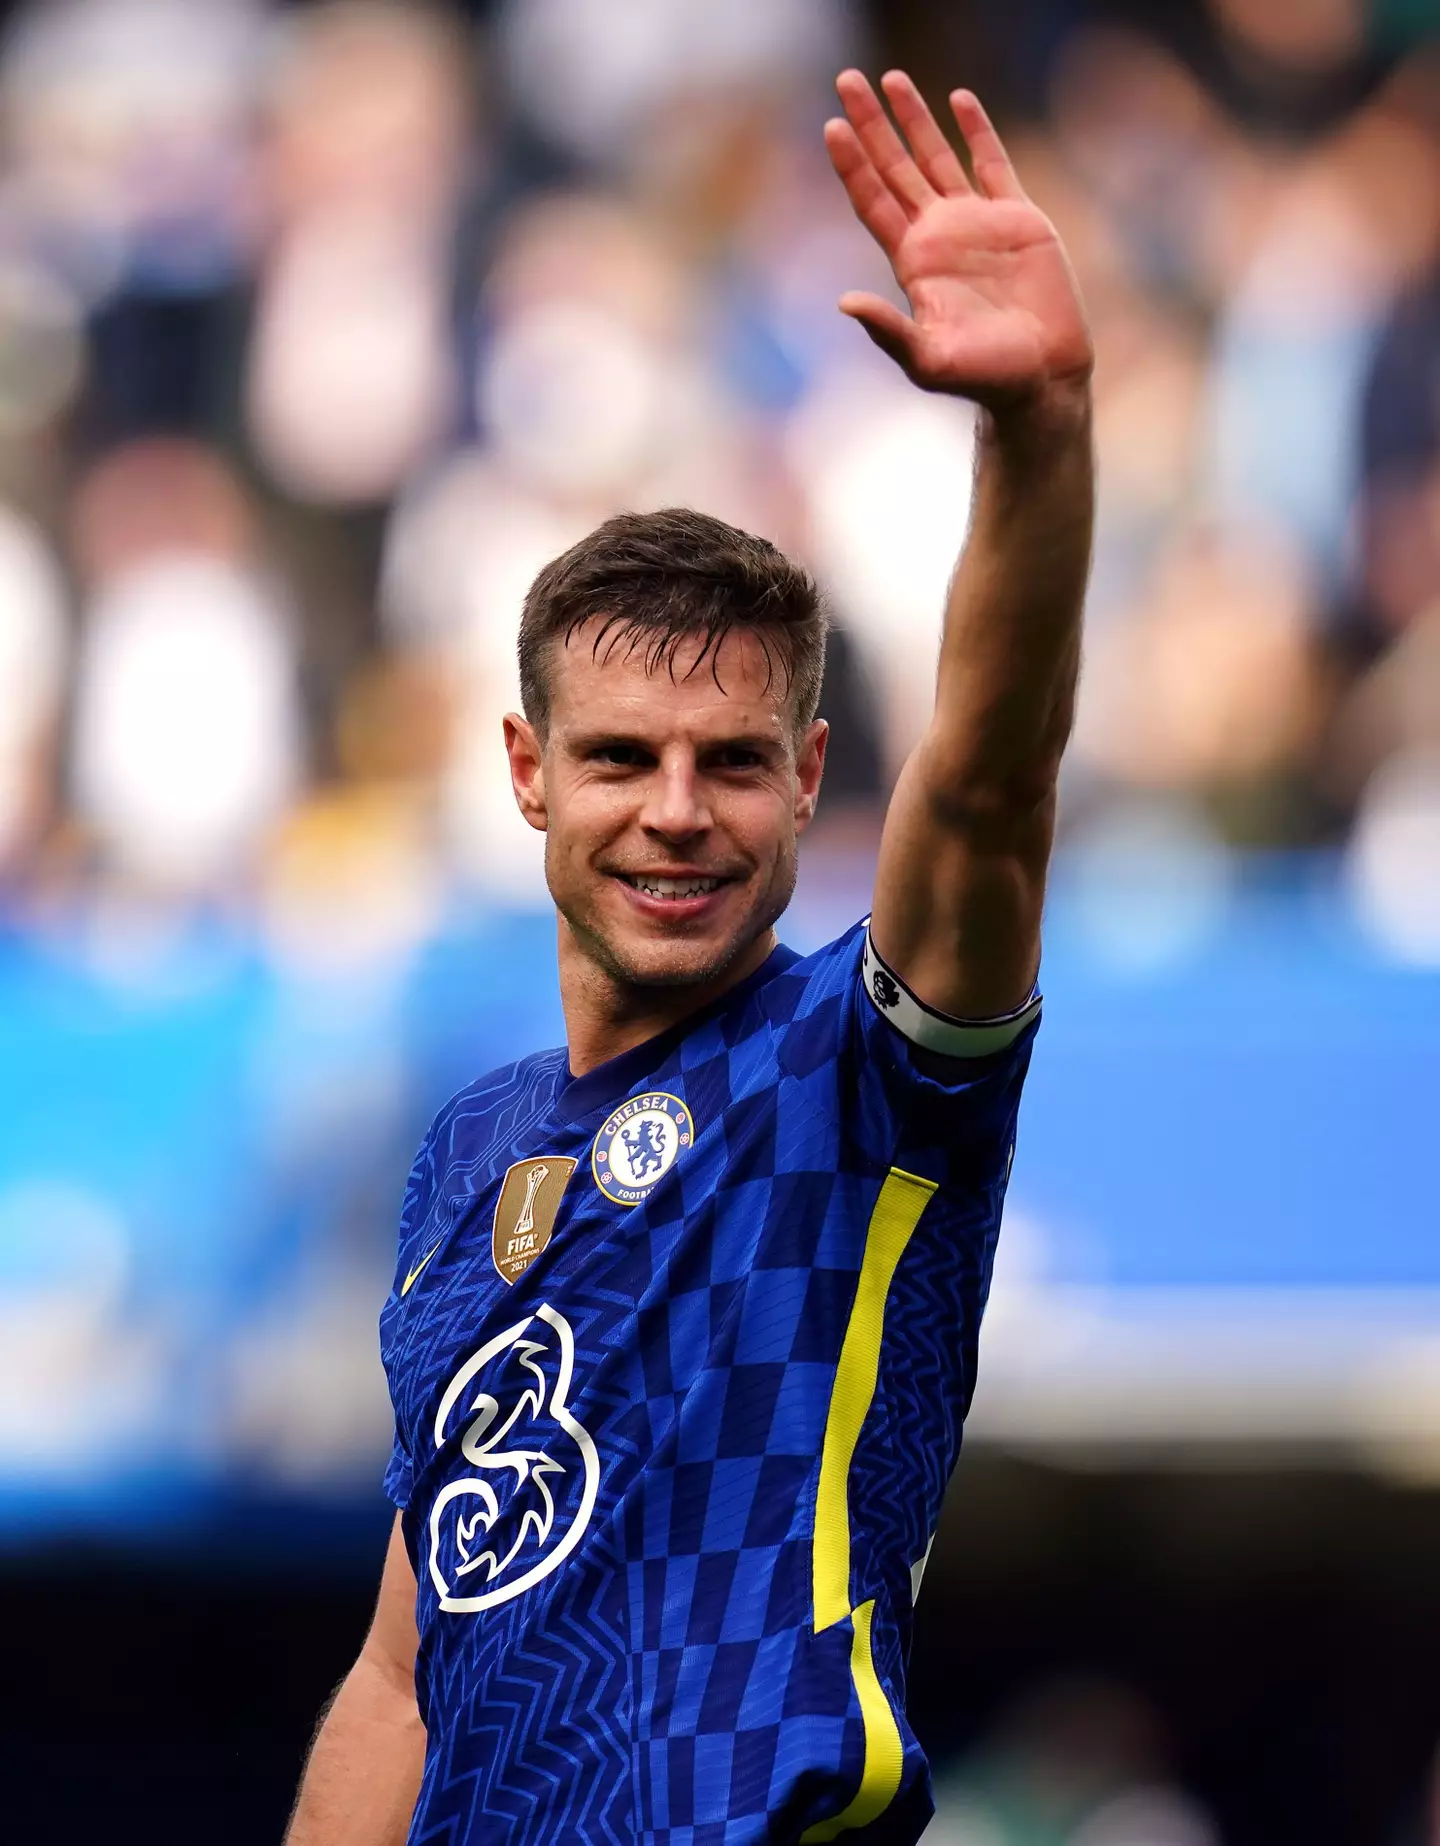 Chelsea’s Cesar Azpilicueta waves to the fans after the Premier League match at Stamford Bridge, London. (Alamy)